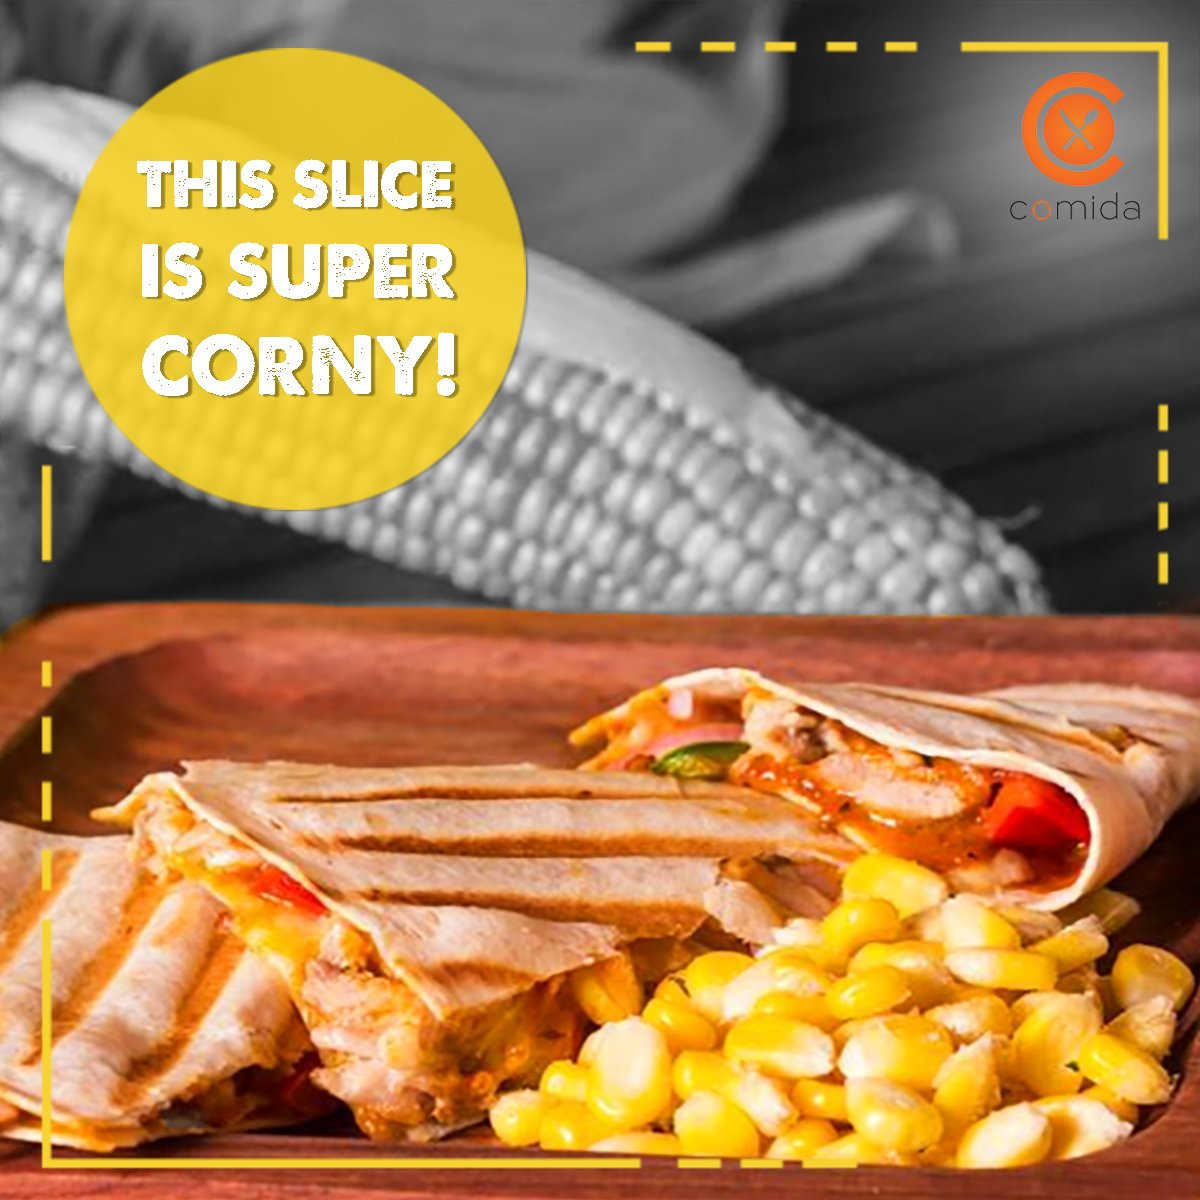 Veg Corn Pizza to cheer up your #Tuesday.
As delicious as it's supposed to be!
Visit Wrappy Affairs for some amazing fast foods and salads.
Download Comida App & get 10% off. goo.gl/C8vzEK

#ComidaApp #Comida #DownloadTheApp #CornPizza #PizzaLovers #TuesdayMotivation